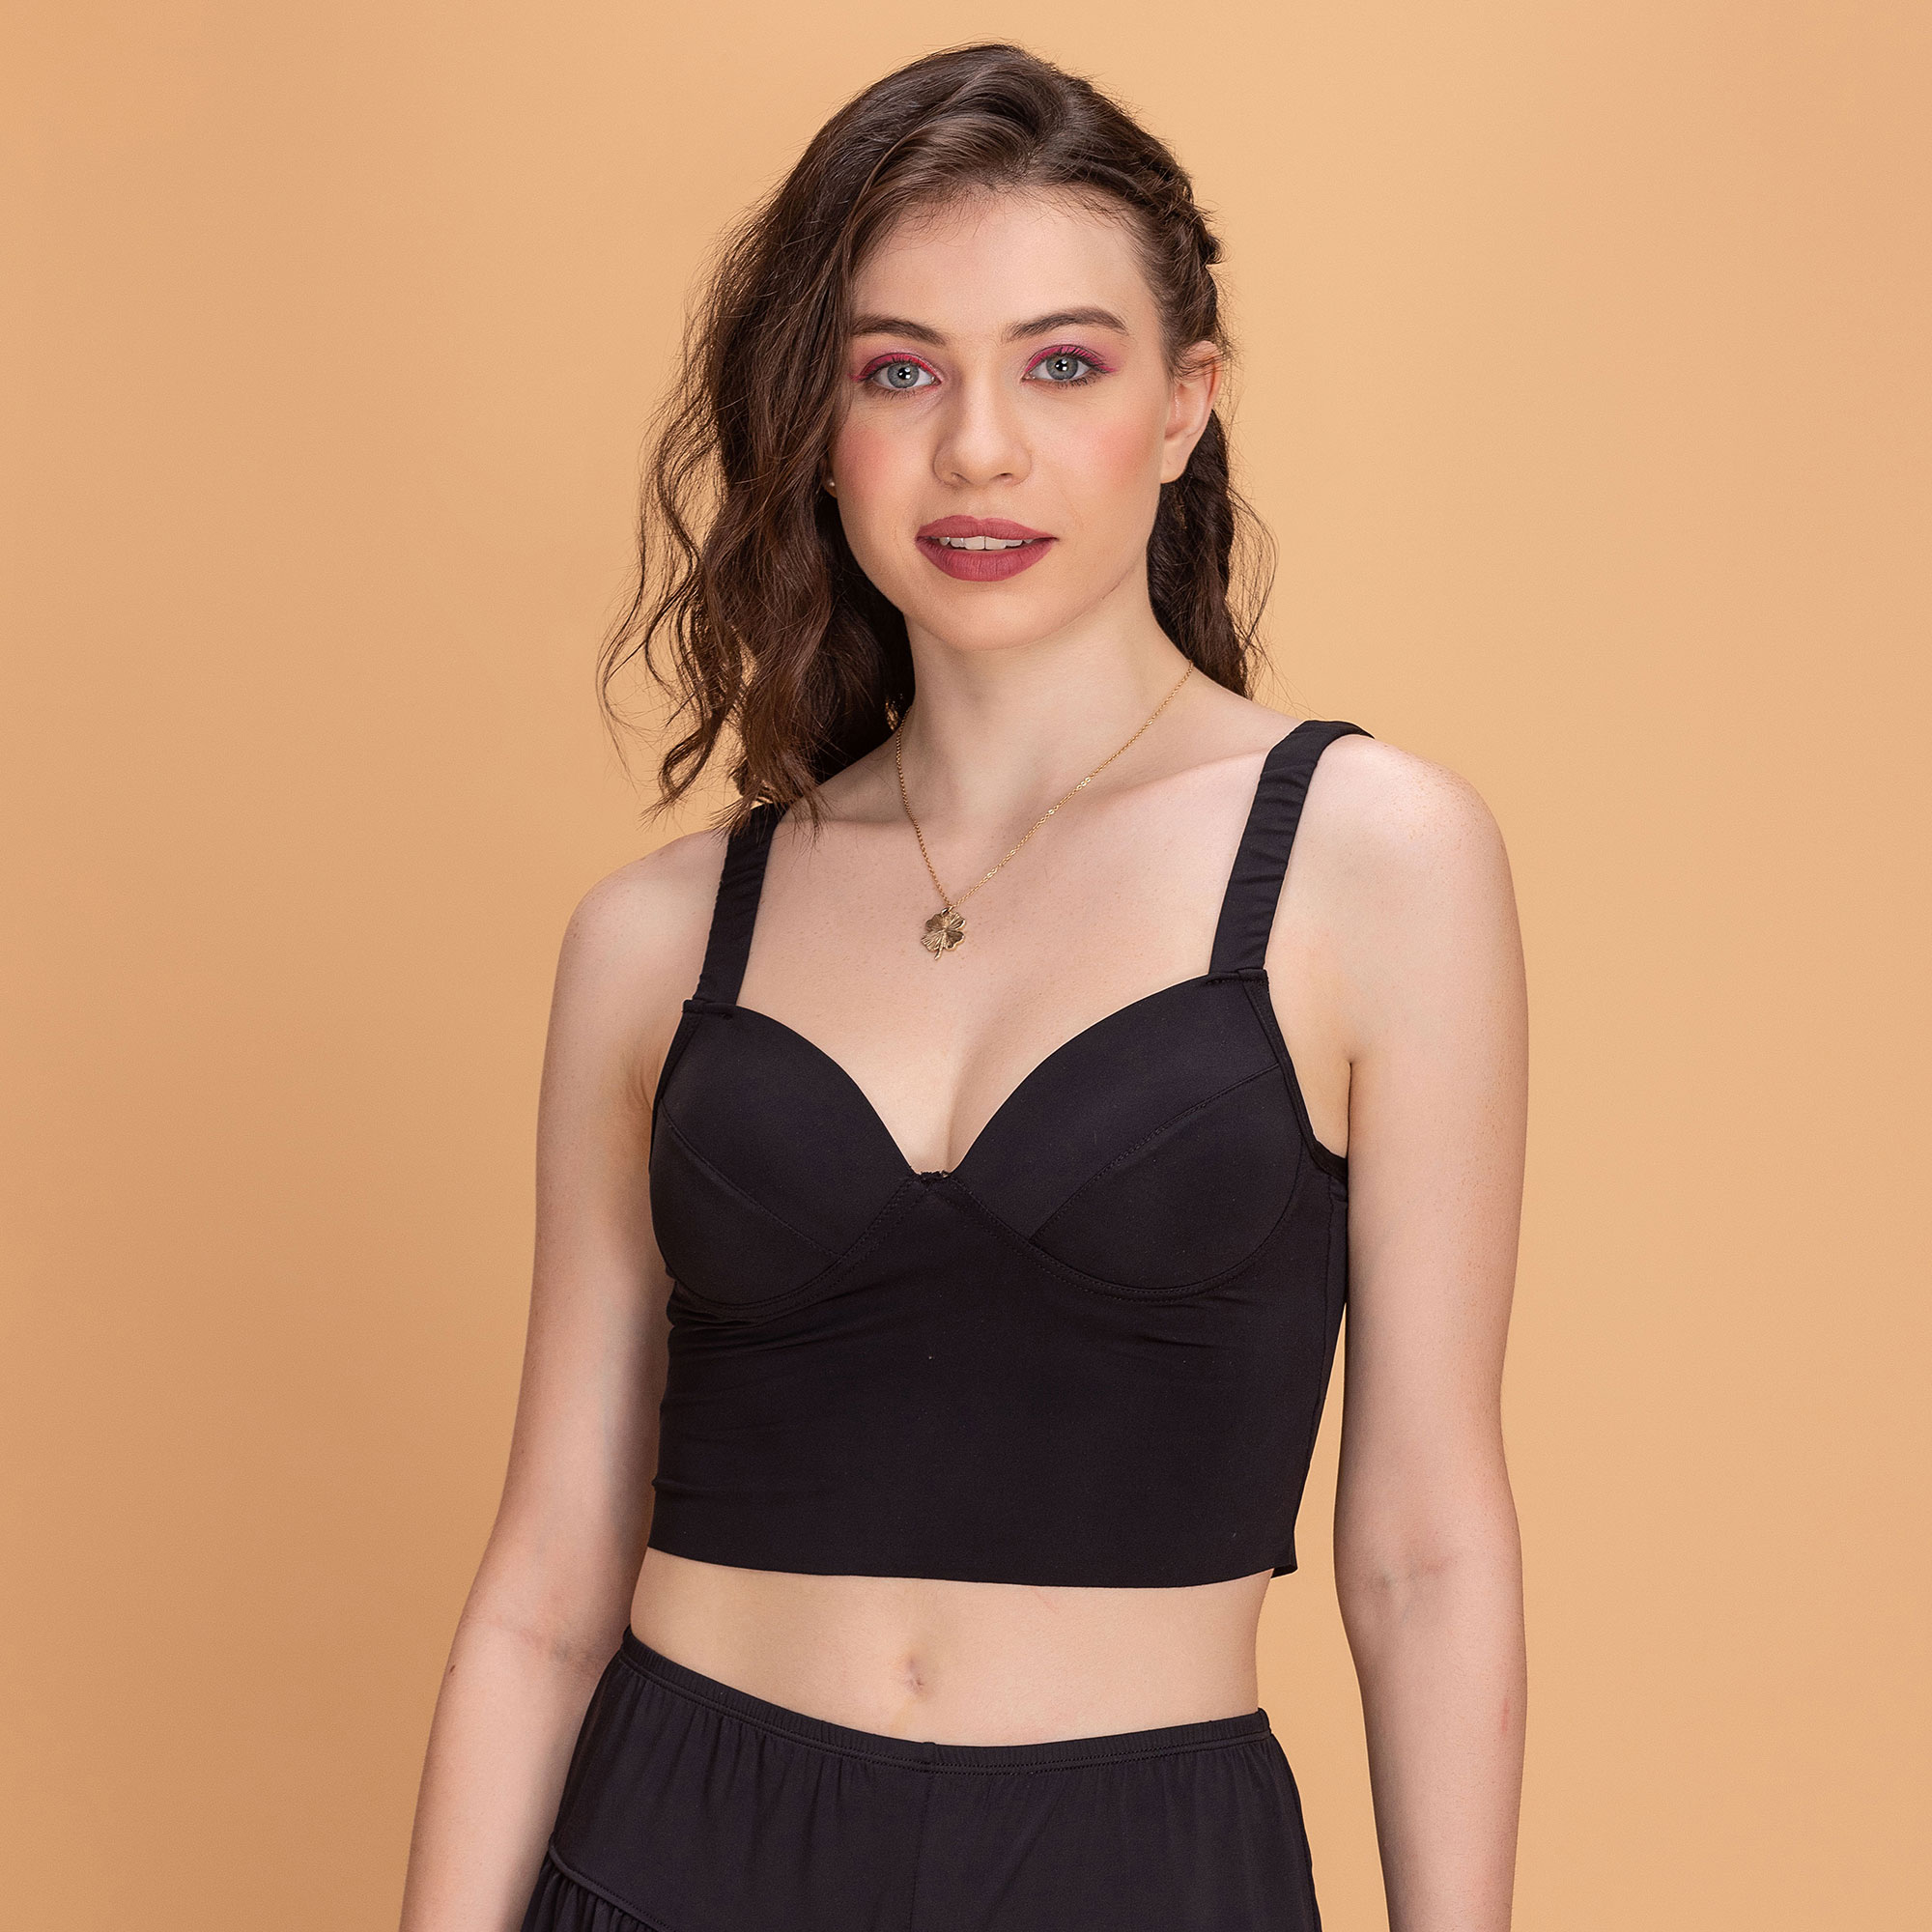 Strappy Black Backless Bralette Tube Top, Lingerie, Sports Bra Free  Delivery India.